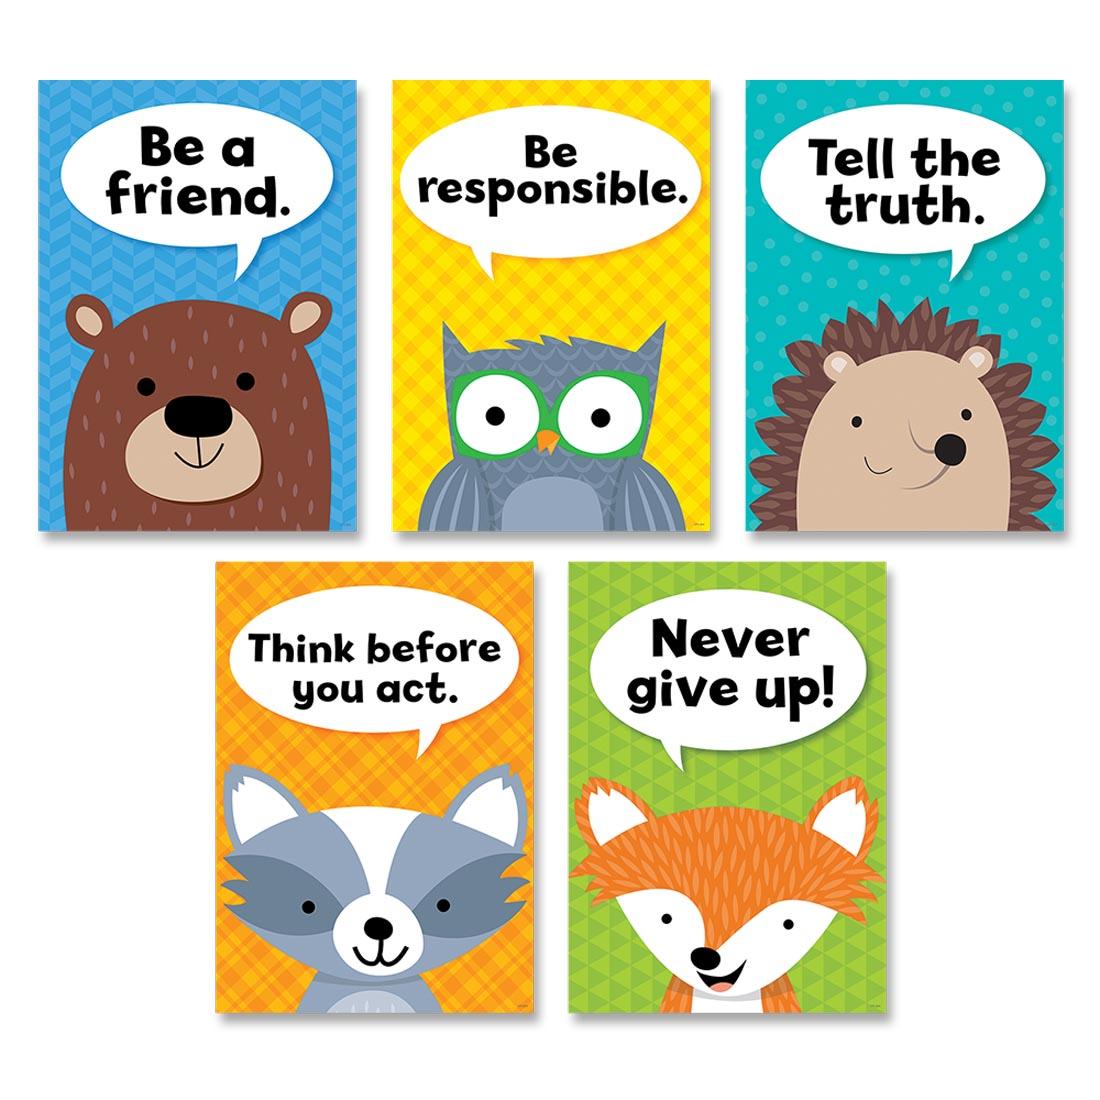 Woodland Friends Character Traits Poster Pack by Creative Teaching Press include Be a Friend, Be Responsible, Tell the Truth, Think Before You Act and Never Gift Up